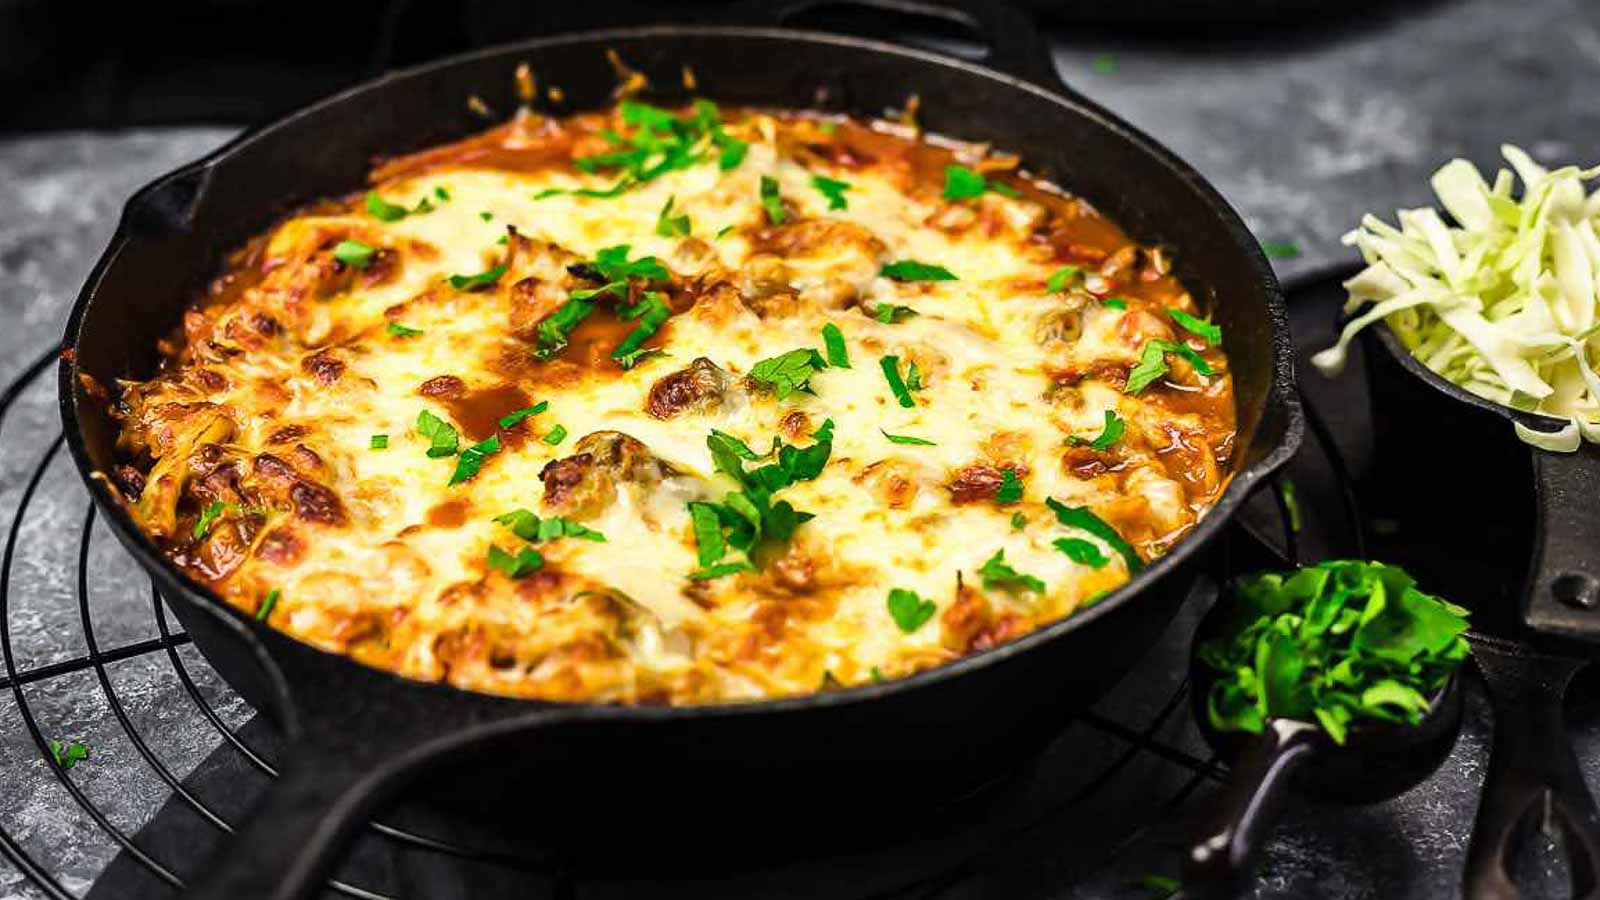 Weeknight Dinners Done Easy: 13 Casseroles For Hands-Off Cooking